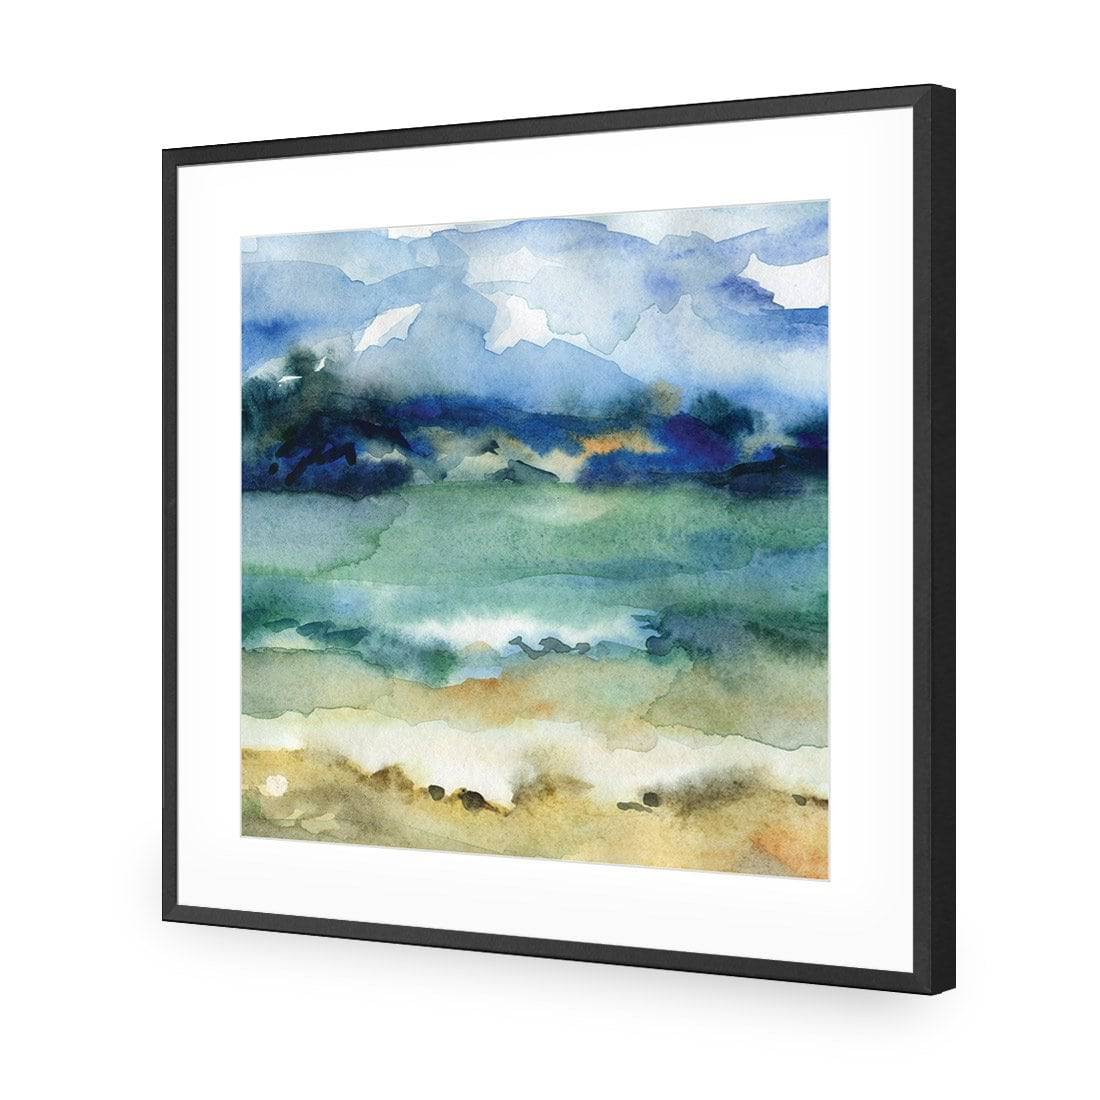 Timeless, Square-Acrylic-Wall Art Design-With Border-Acrylic - Black Frame-37x37cm-Wall Art Designs